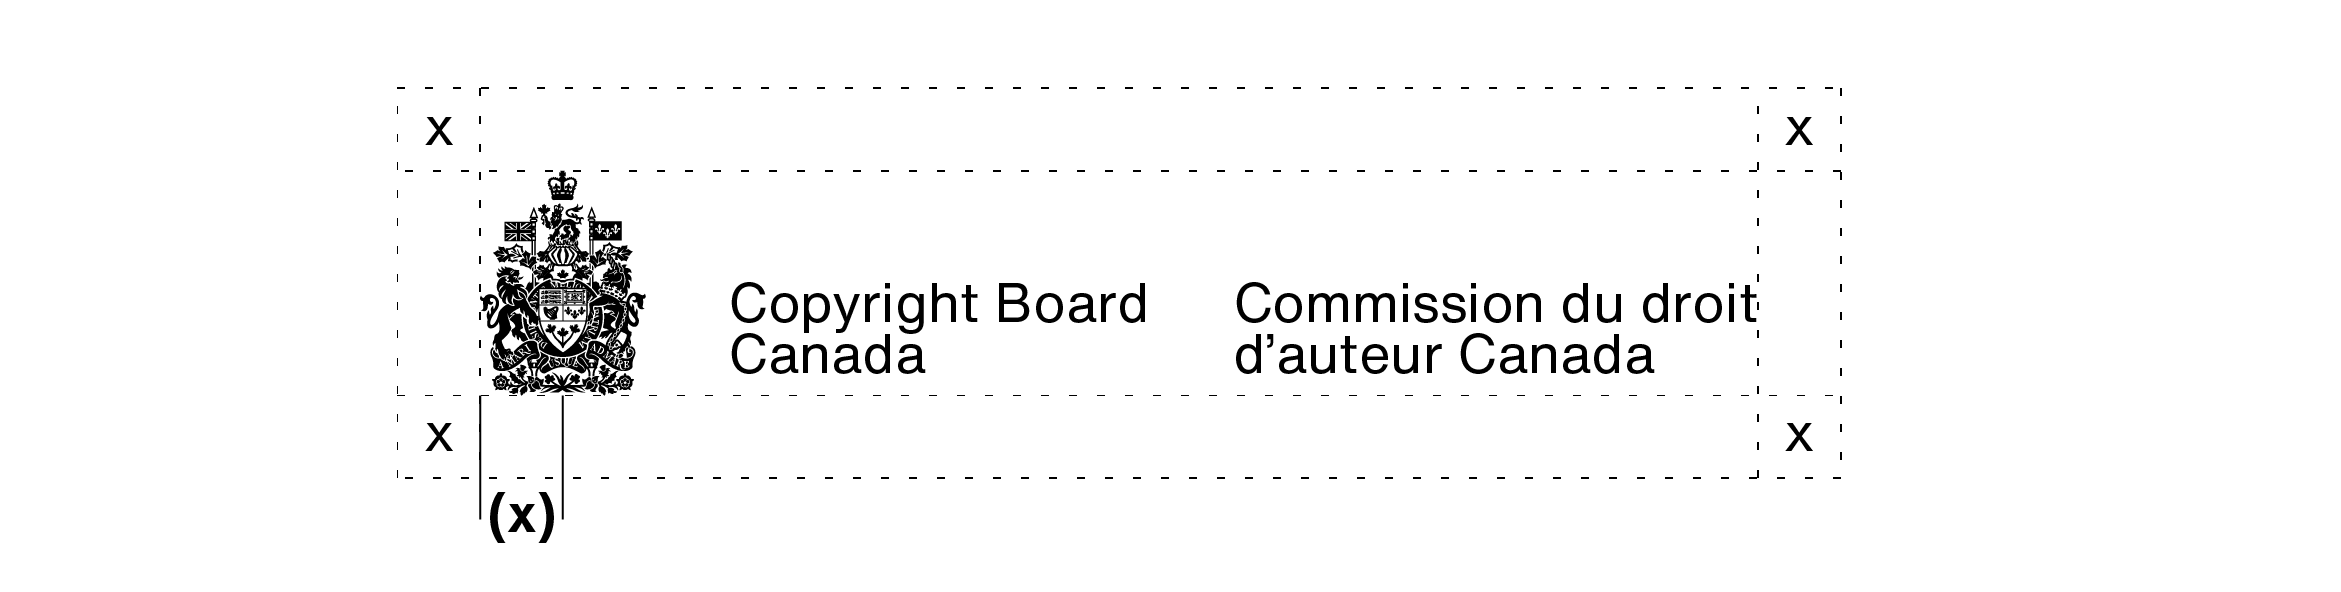 Arms signature for Copyright Board Canada (a 2 line arms signature). The clear space required around an arms signature is explained in the text above.